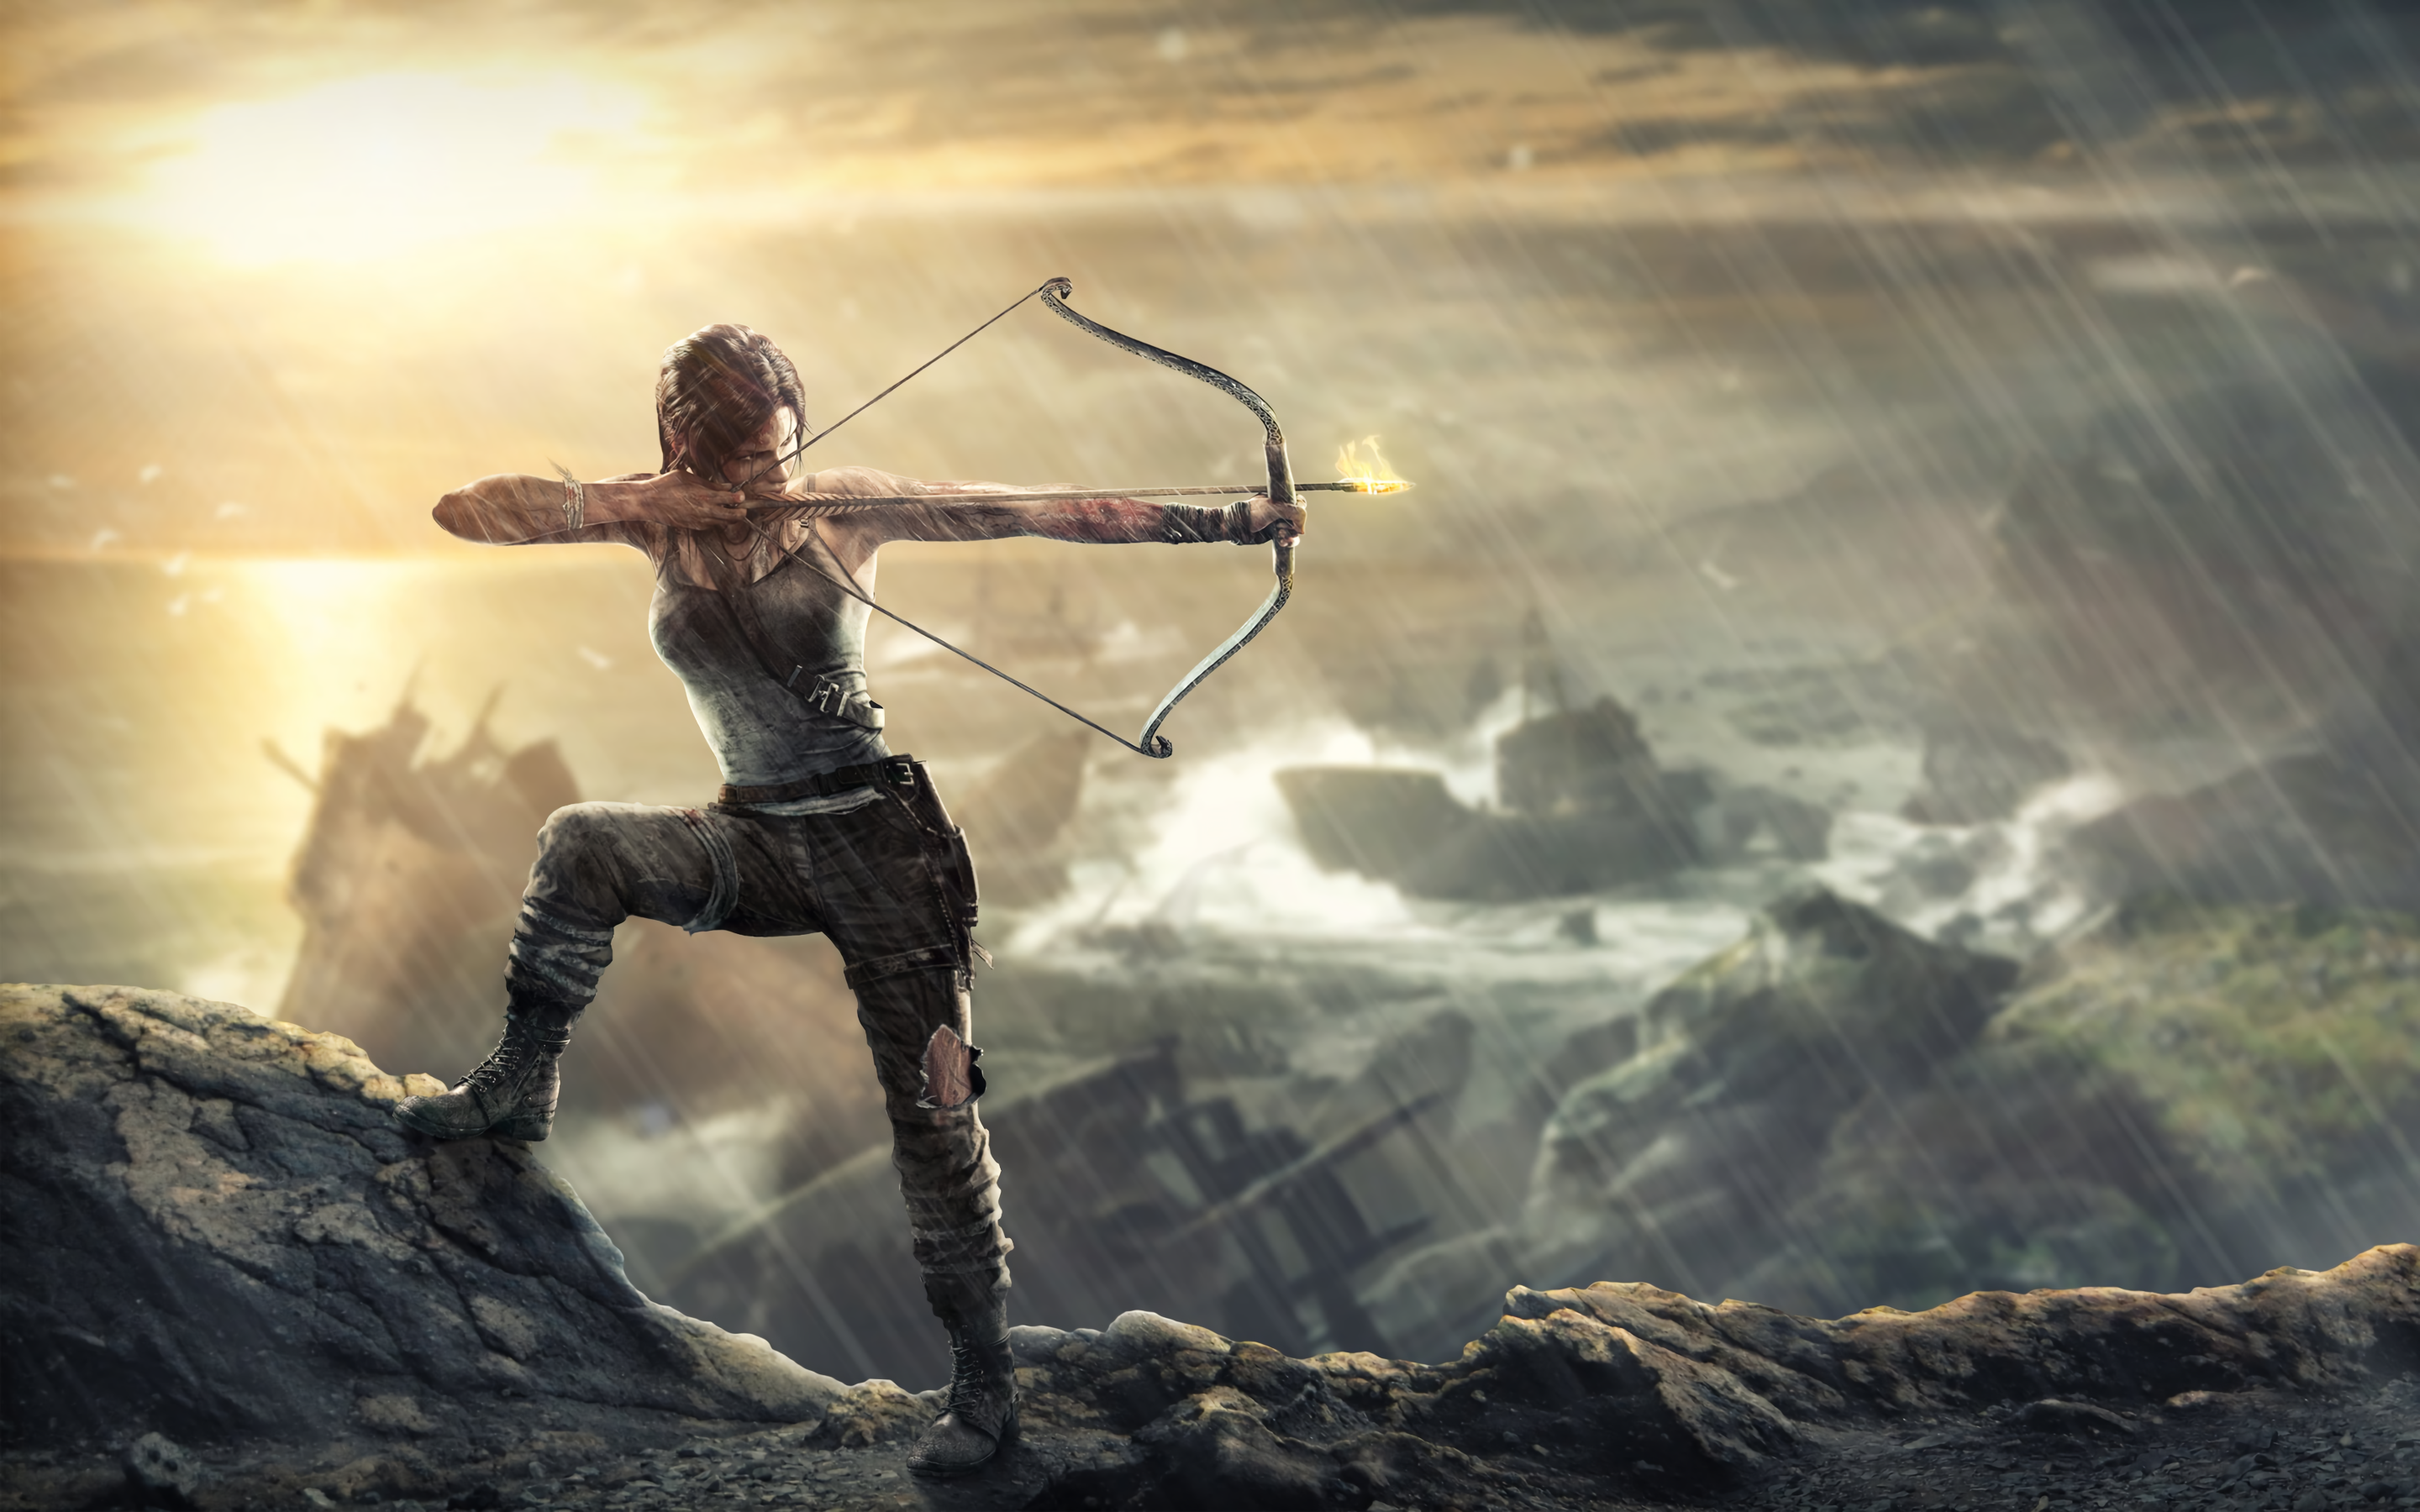 General 2880x1800 Tomb Raider video game art digital digital art video games sky clouds outdoors sunlight bow video game characters Lara Croft (Tomb Raider) bow and arrow aiming video game girls